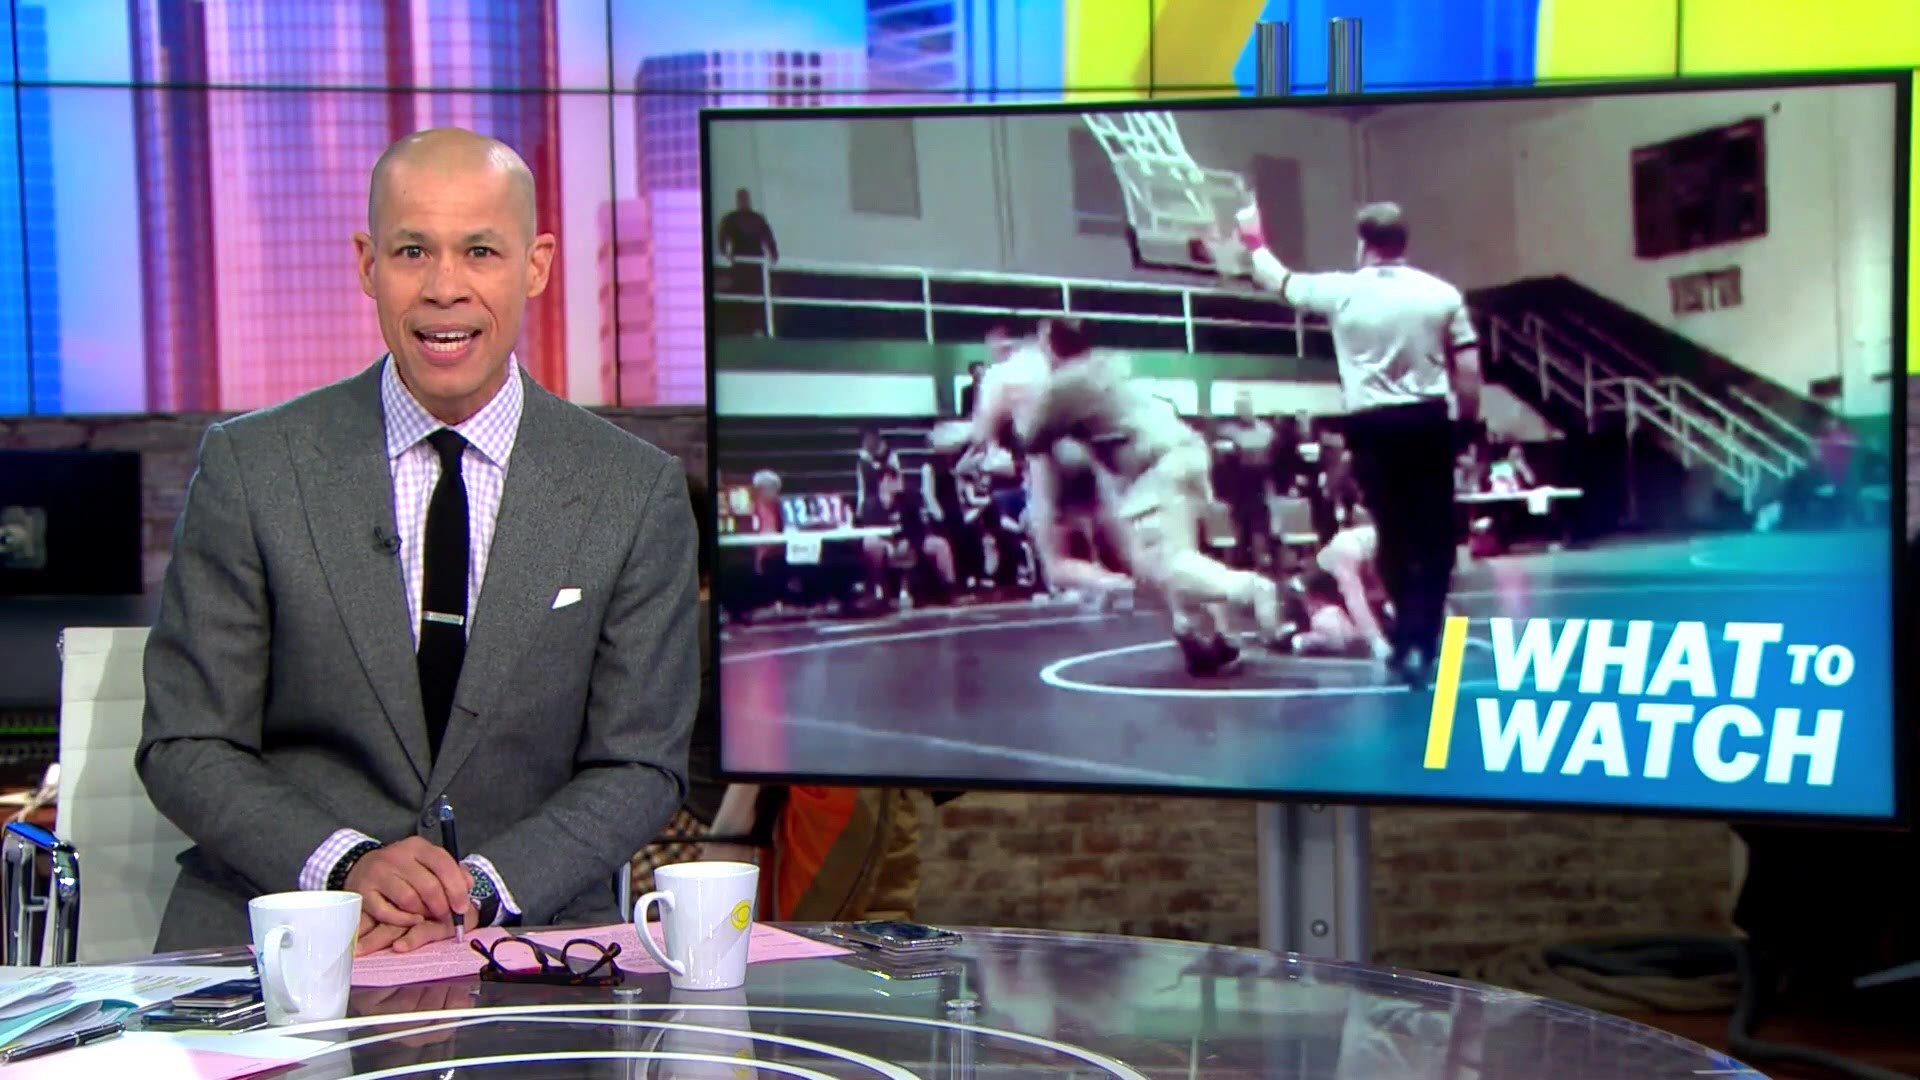 CBS This Morning's Anthony Mason, Gayle King, and Tony DoKoupil give their thoughts on the video that shows a dad attacking his son's opponent at a wrestling match.